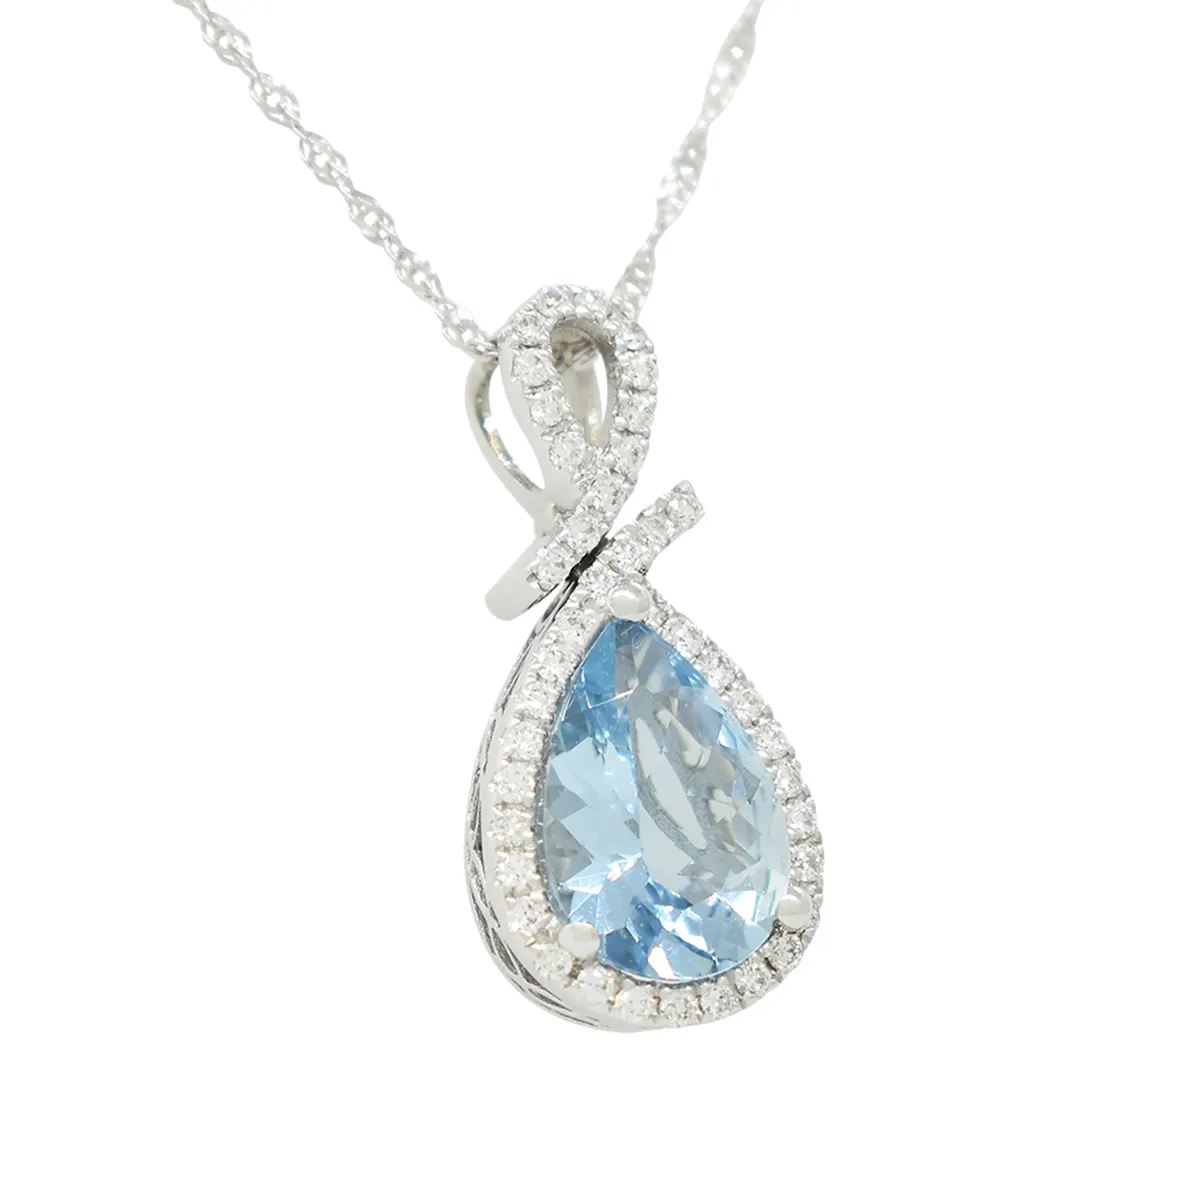 Aquamarine and diamond necklace in 14K white gold with 1.42 Ct. pear shape natural aquamarine and 0.21 Ct. t.w. in 41 round cut genuine diamonds